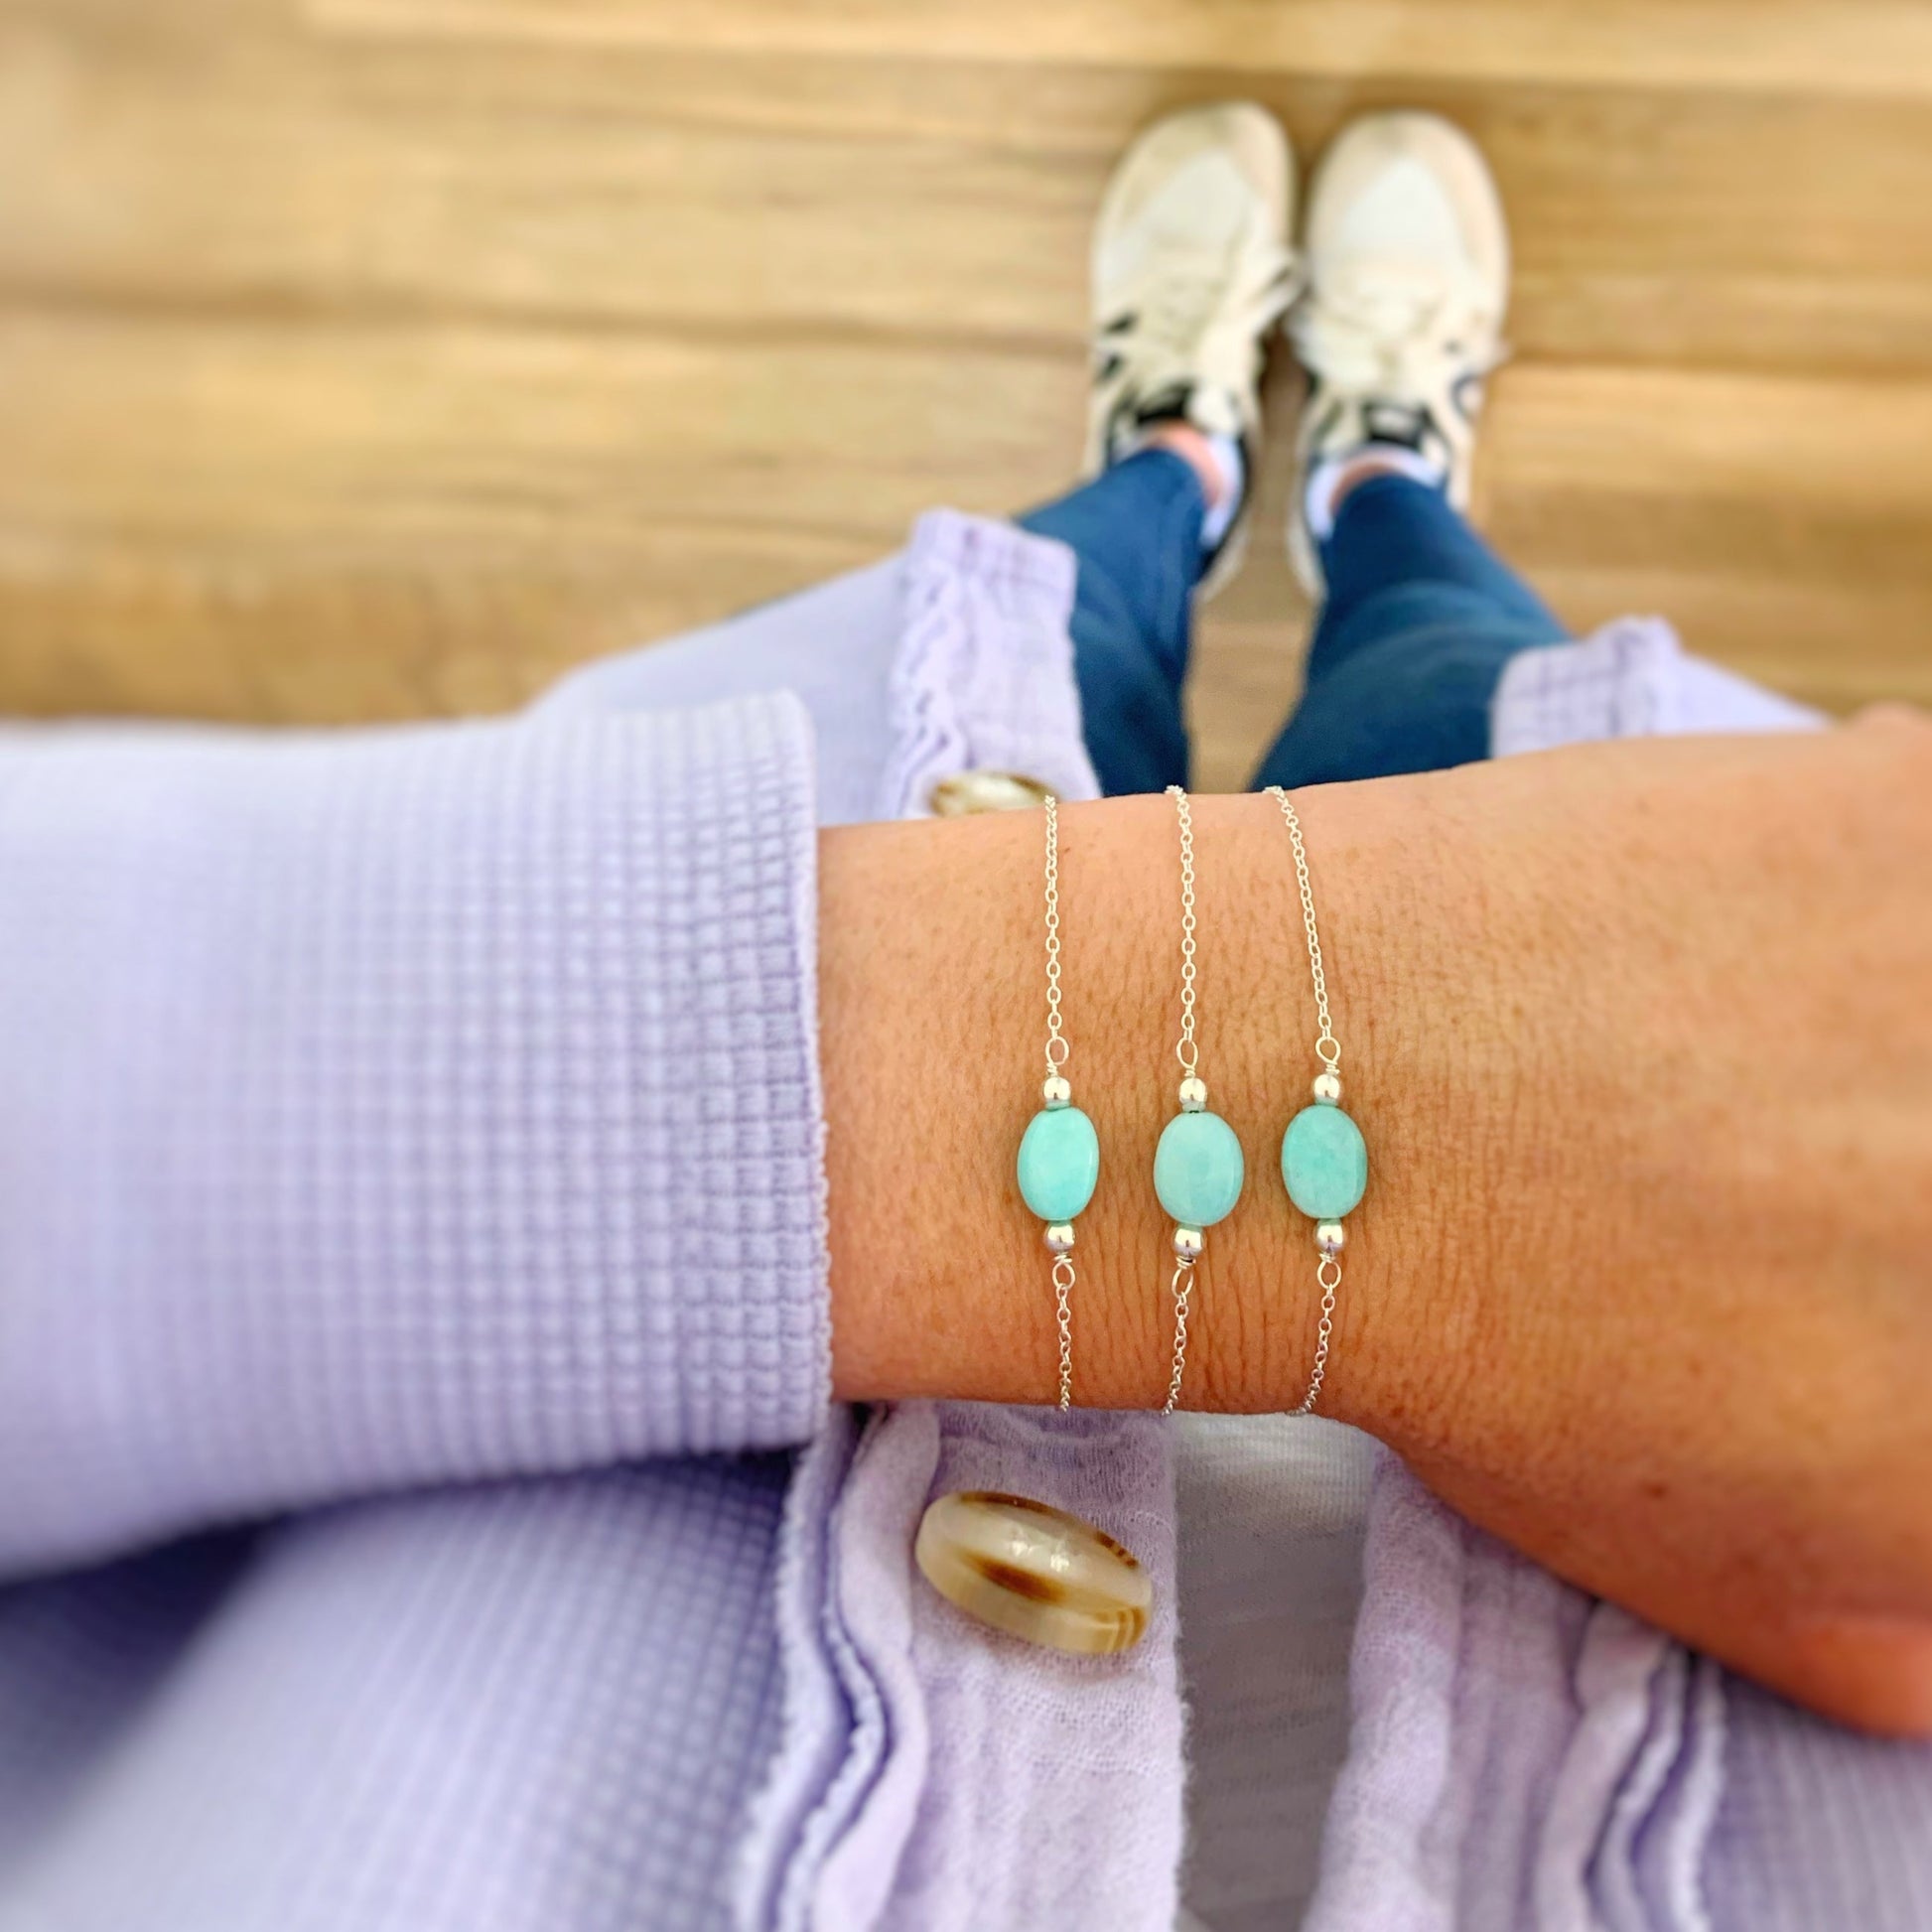 3 laguna bracelets by mermaids and madeleines pictured on a wrist. the bracelets are created with dainty sterling silver chain, bright aqua amazonite and have an adjustable clasp